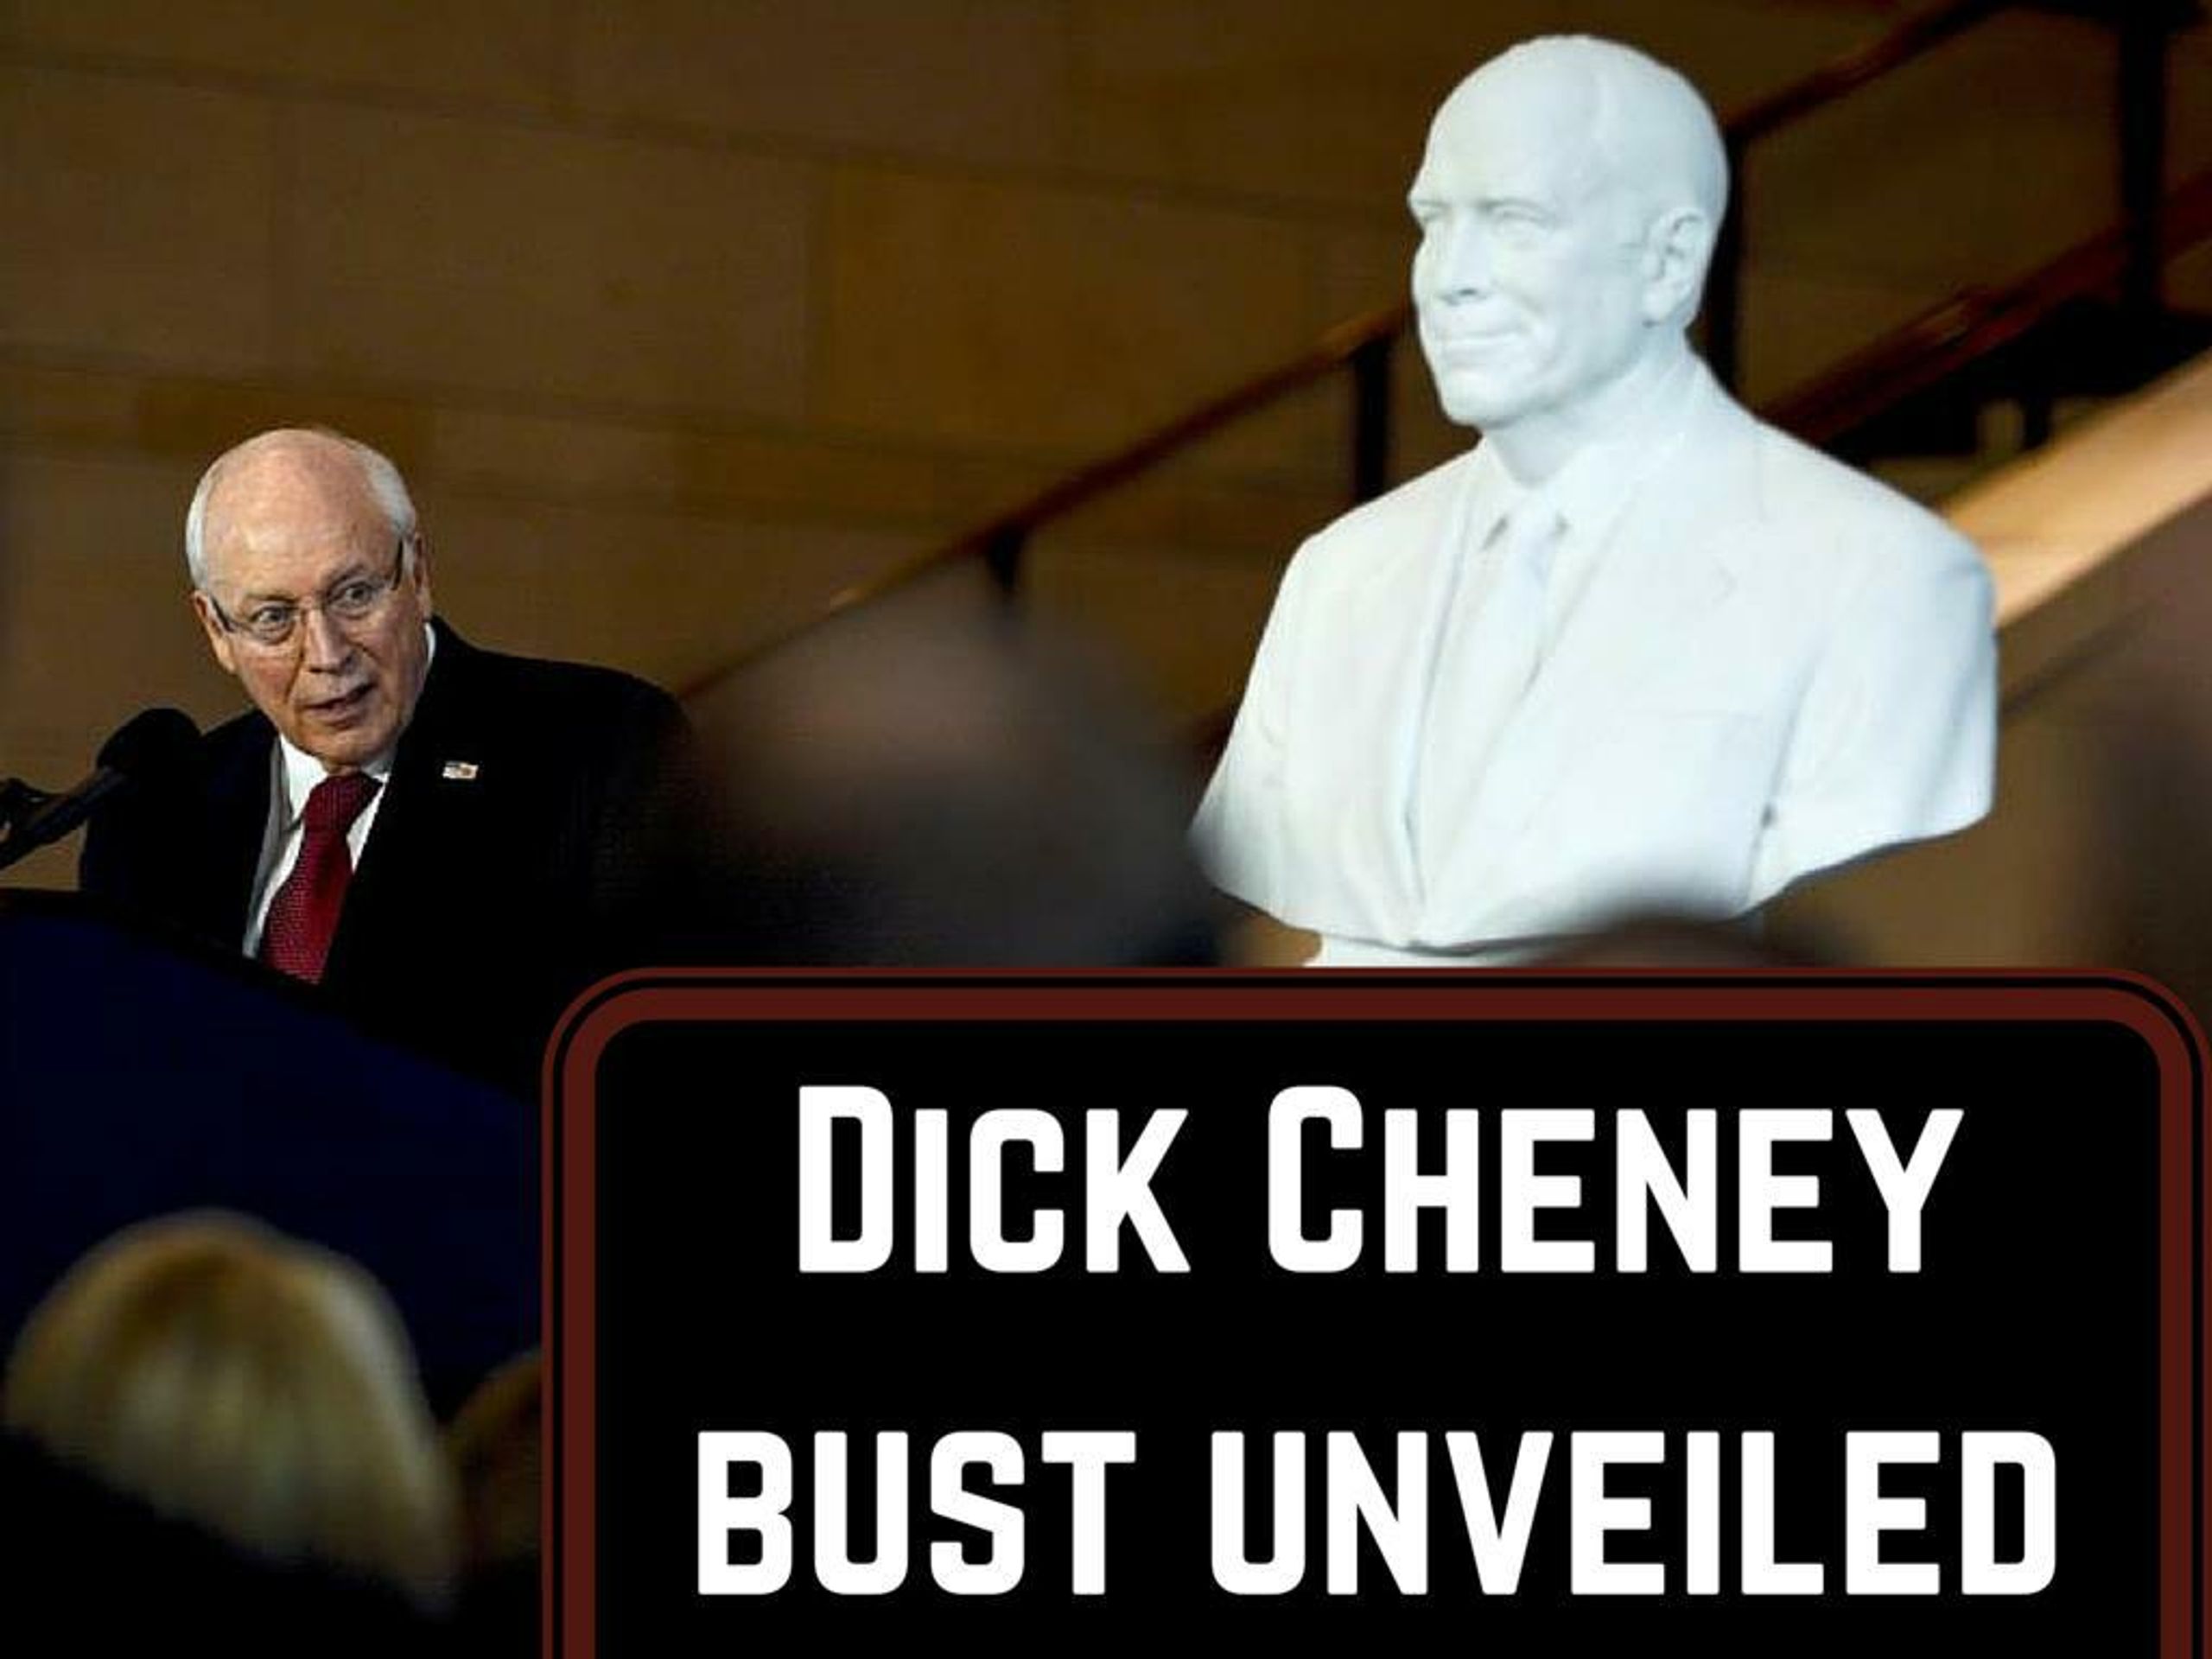 Dick cheney assassination ring